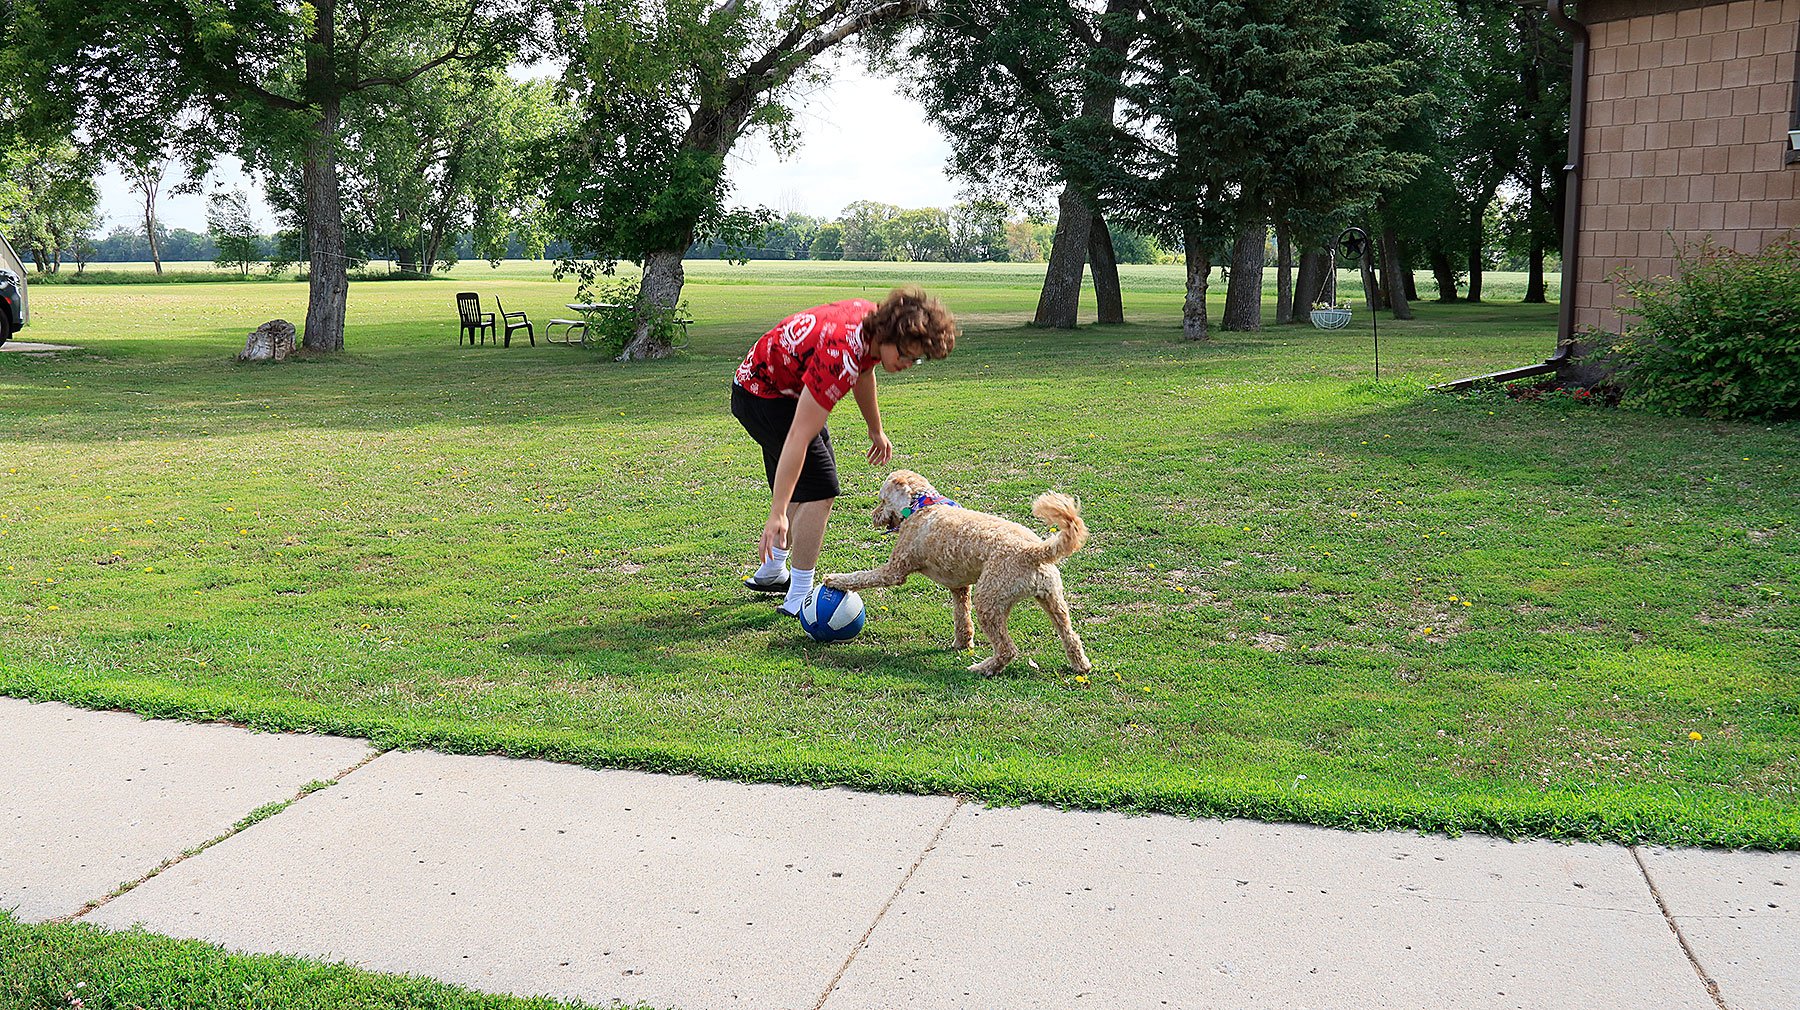   Caring for resident dog River teaches residents responsibility and compassion.  